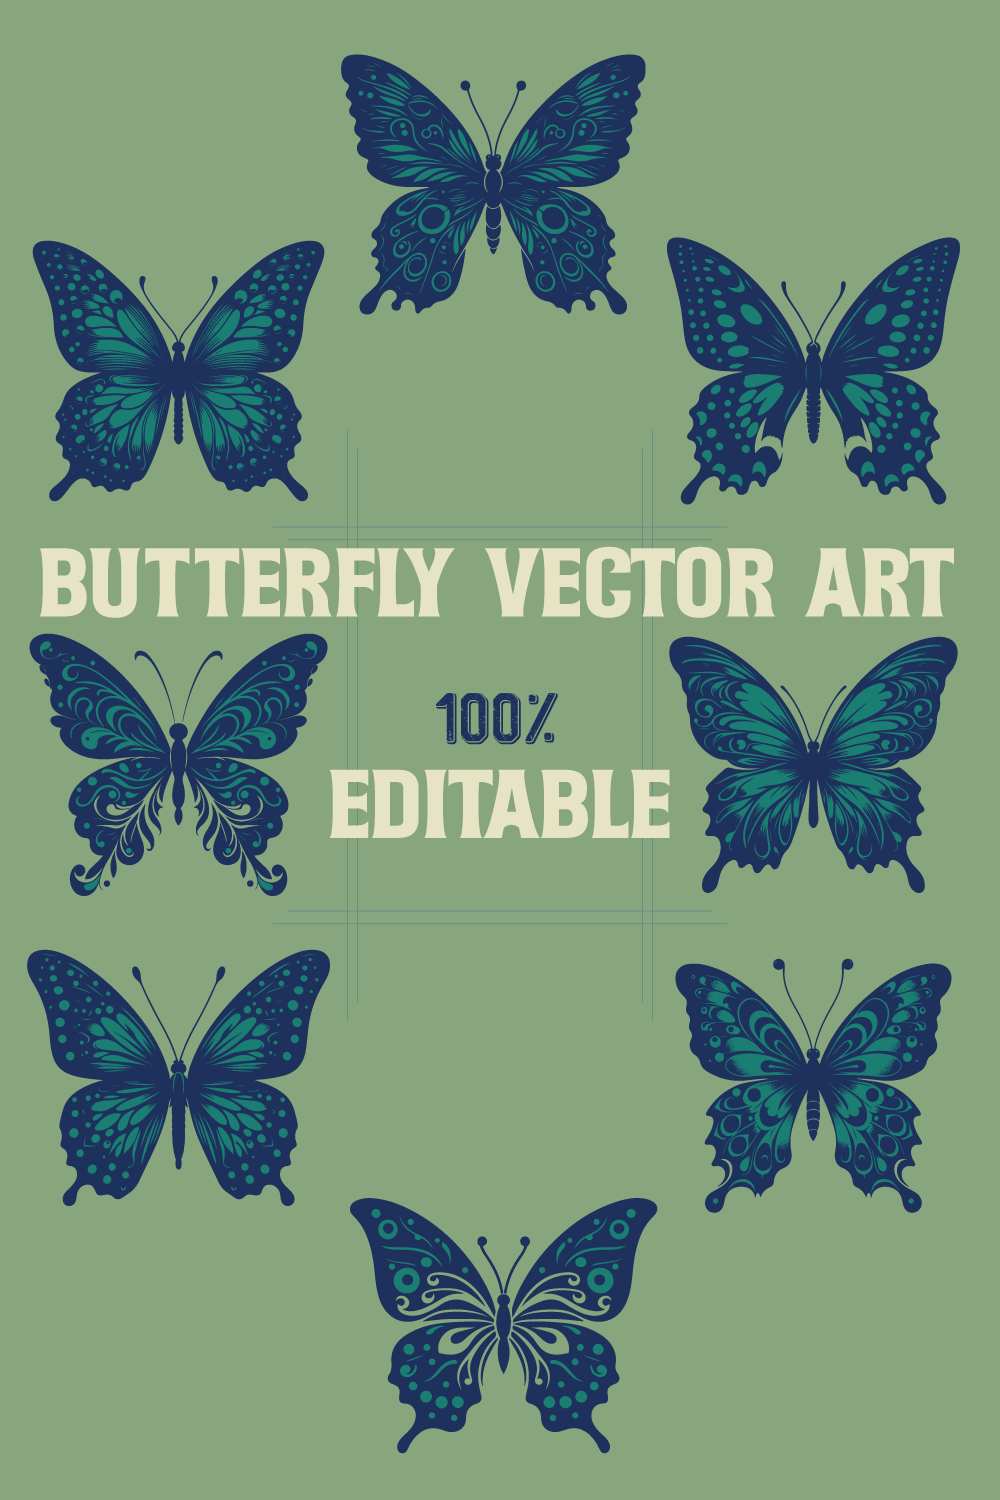 Butterfly vector artwork pinterest preview image.